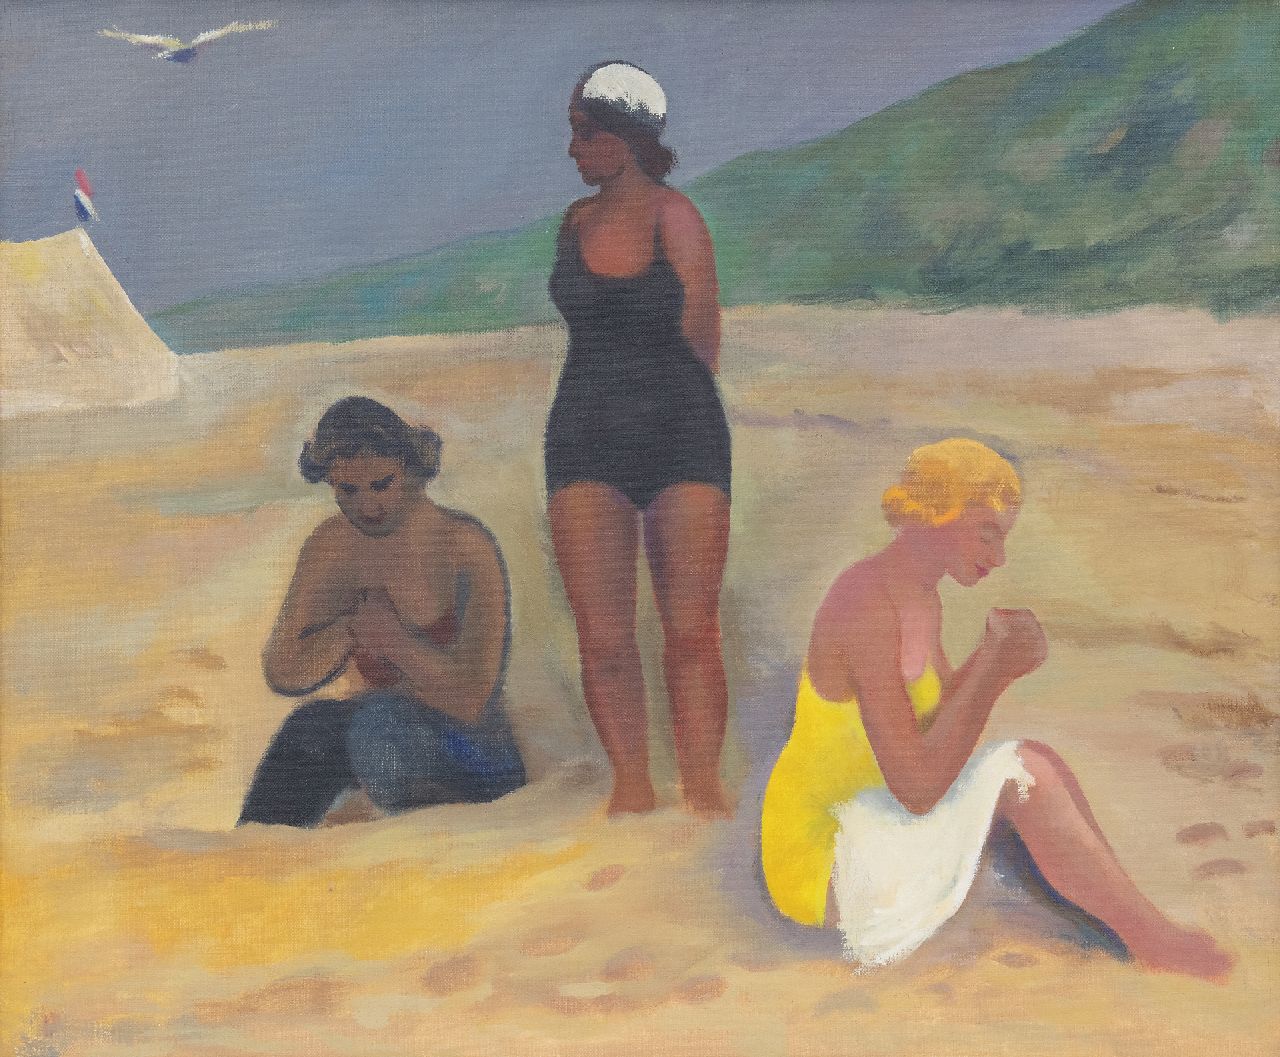 Kleima E.A.  | 'Ekke' Abel Kleima, 3 ladies on the beach, Schiermonnikoog, oil on canvas 50.4 x 60.5 cm, signed with initials on the stretcher and dated 1939 on the stretcher